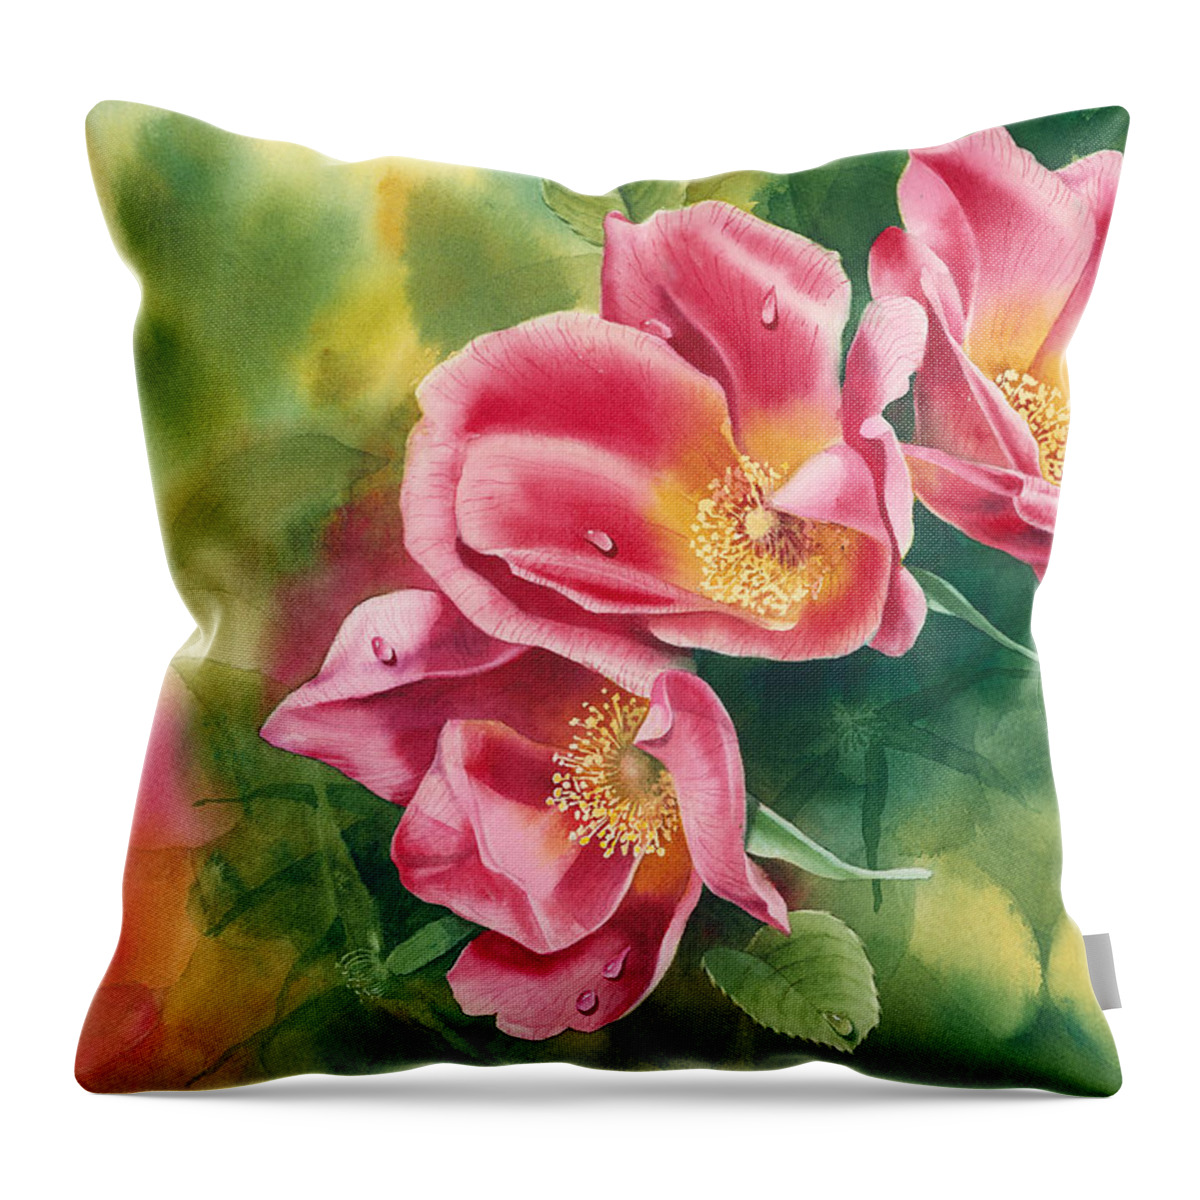 Flower Throw Pillow featuring the painting Misty Roses by Espero Art